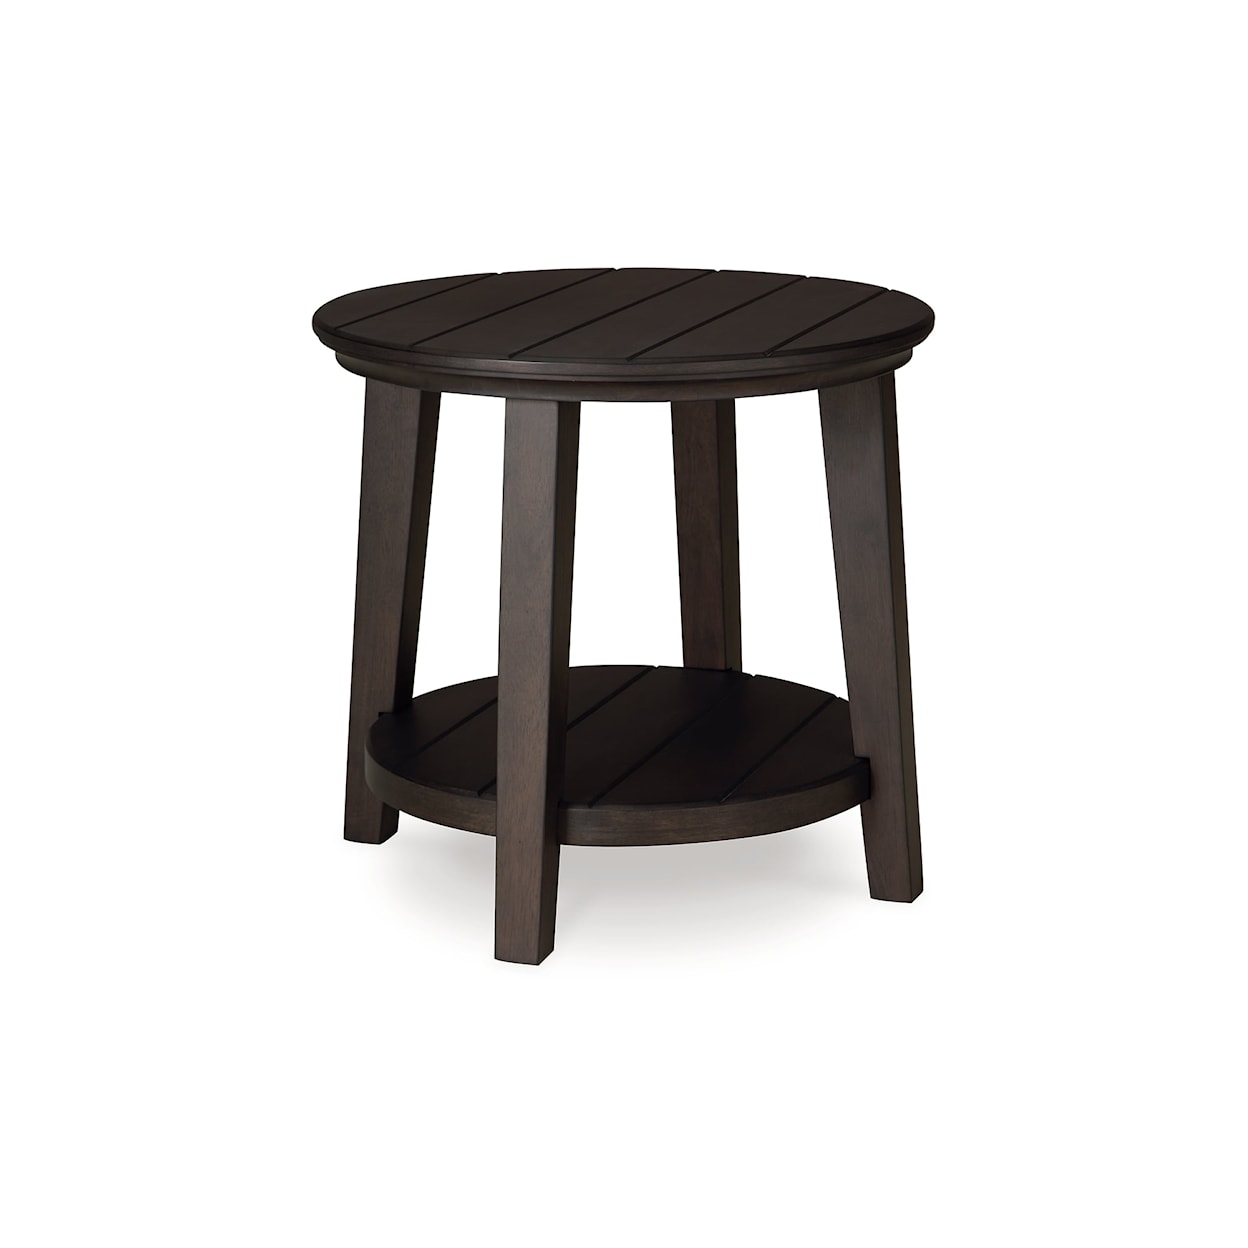 Benchcraft Celamar Round End Table